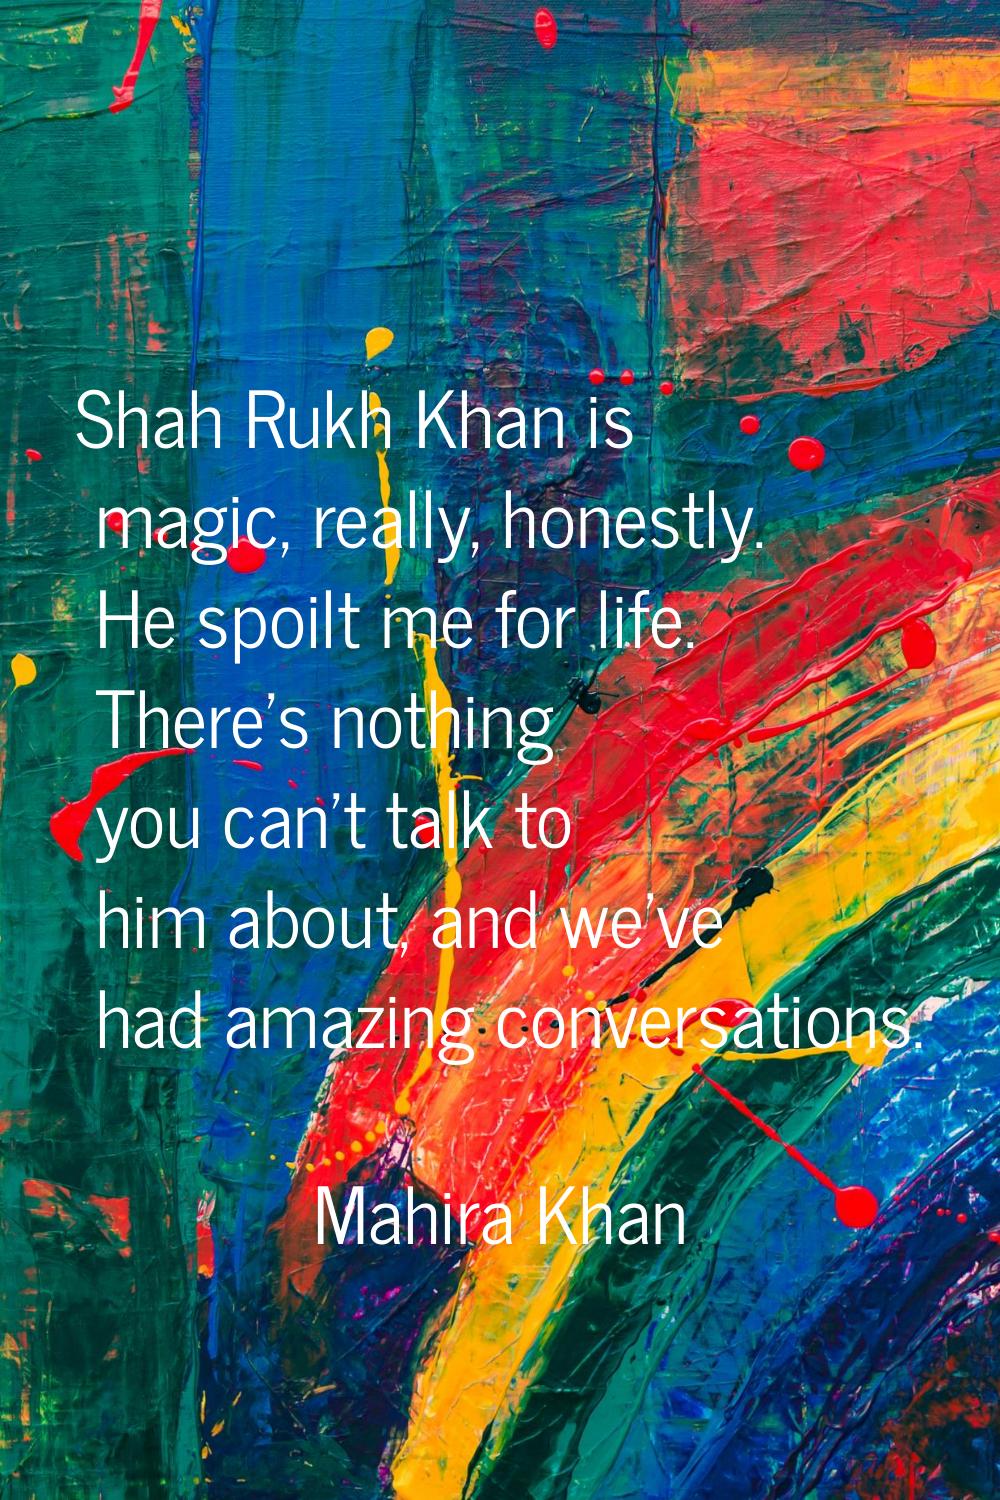 Shah Rukh Khan is magic, really, honestly. He spoilt me for life. There's nothing you can't talk to